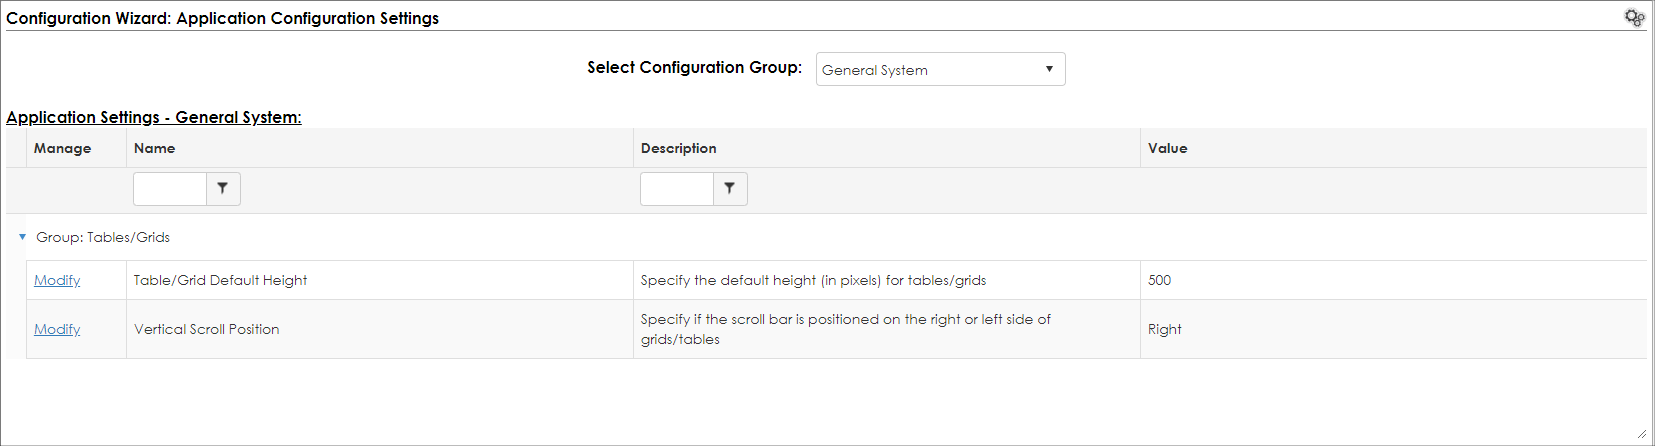 ContractInsight's General System Application Settings page